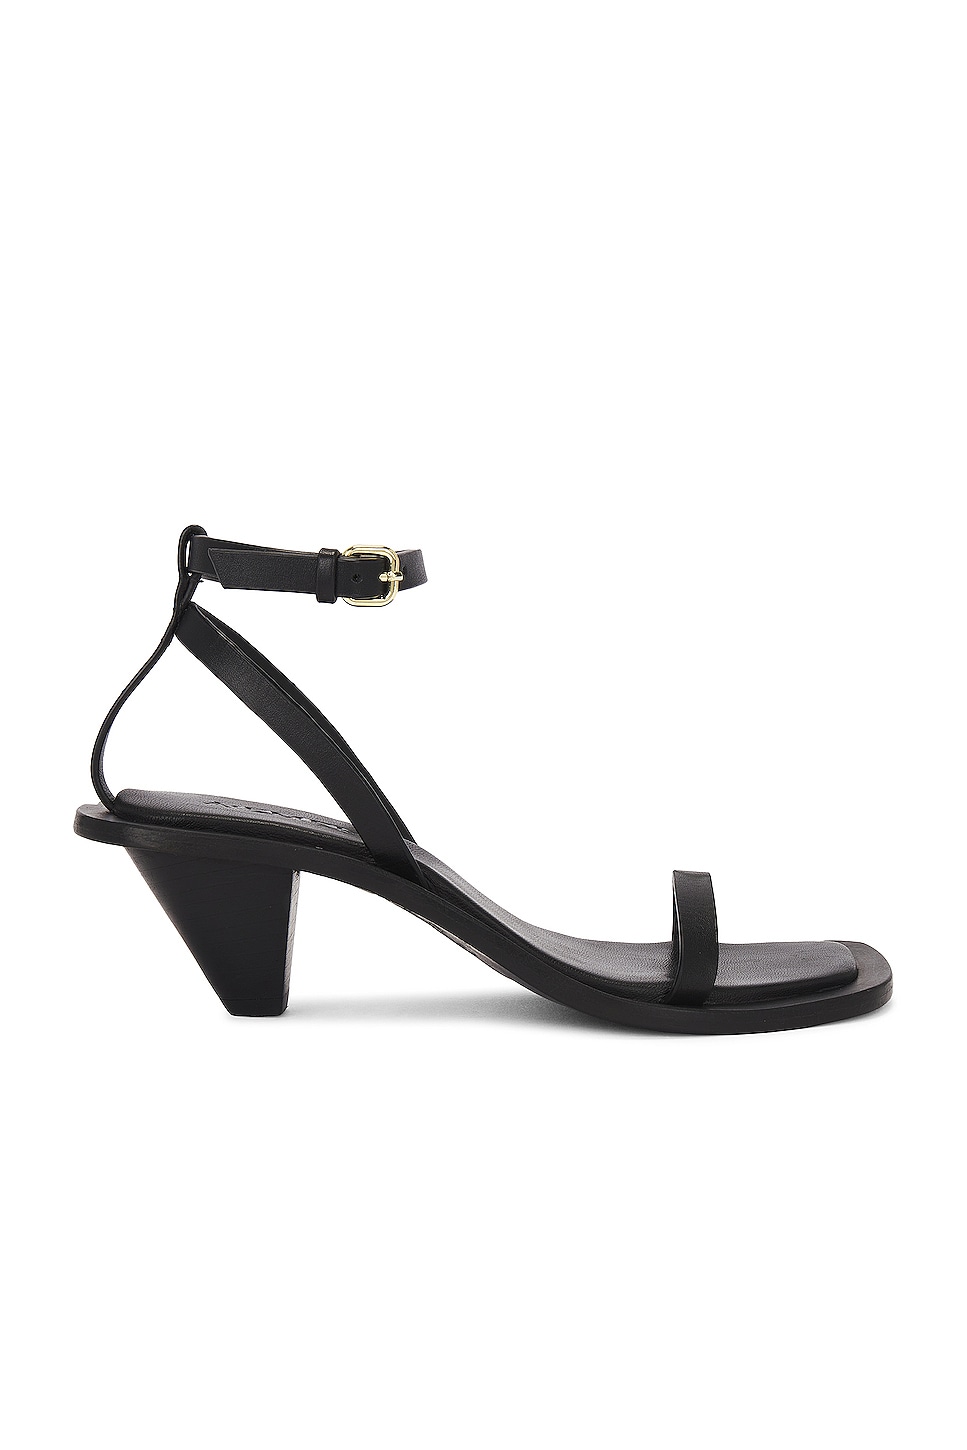 Image 1 of A.EMERY Irving Heeled Sandal in Black